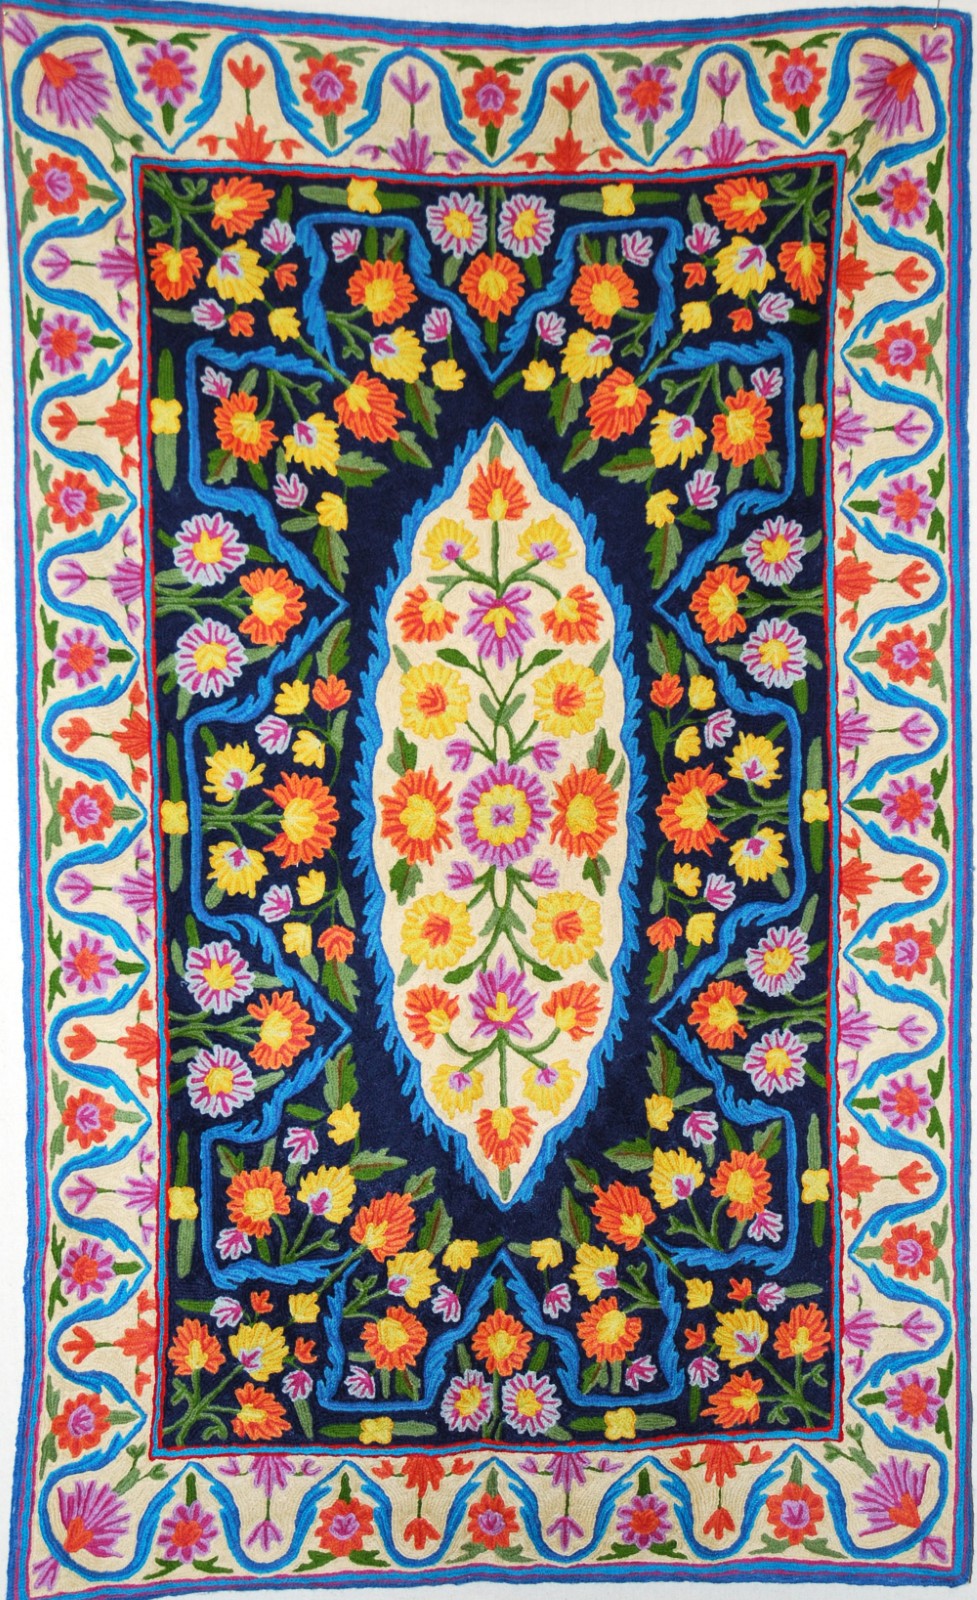 ChainStitch Tapestry Kilim Woolen Area Rug, Multicolor Embroidery 2.5x -  Best of Kashmir